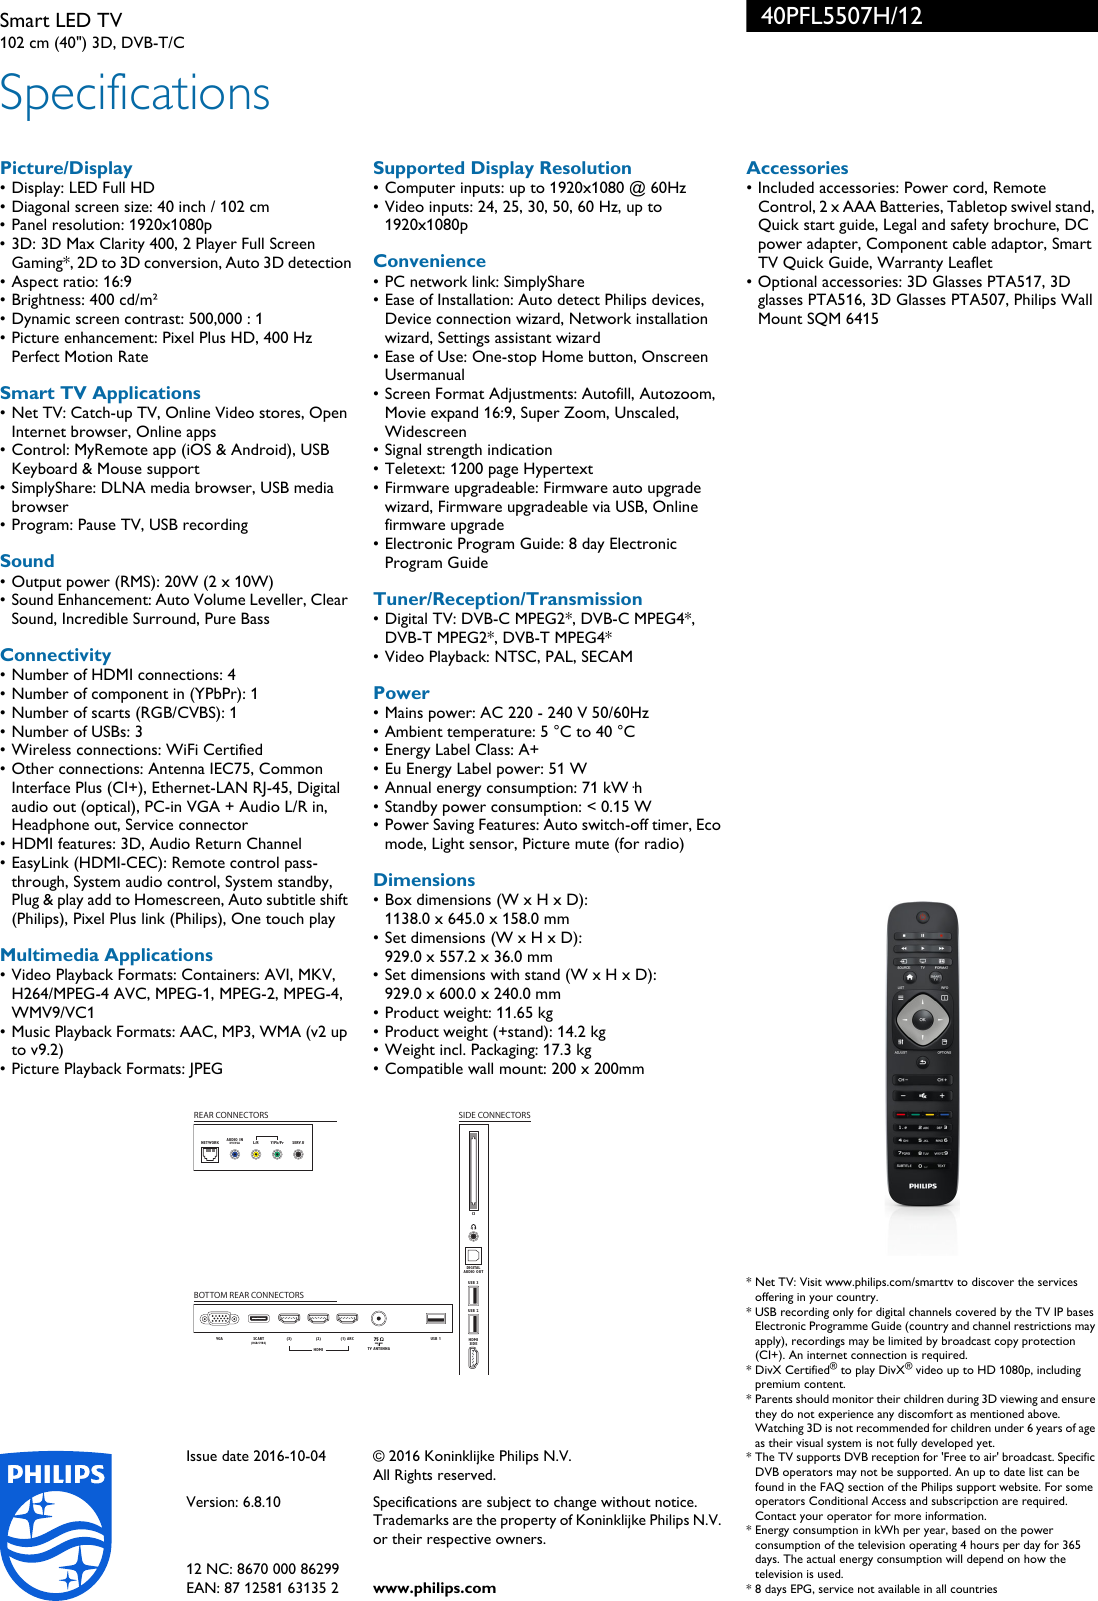 Page 3 of 3 - Philips 40PFL5507H/12 Smart LED TV With Pixel Plus HD User Manual Leaflet 40pfl5507h 12 Pss